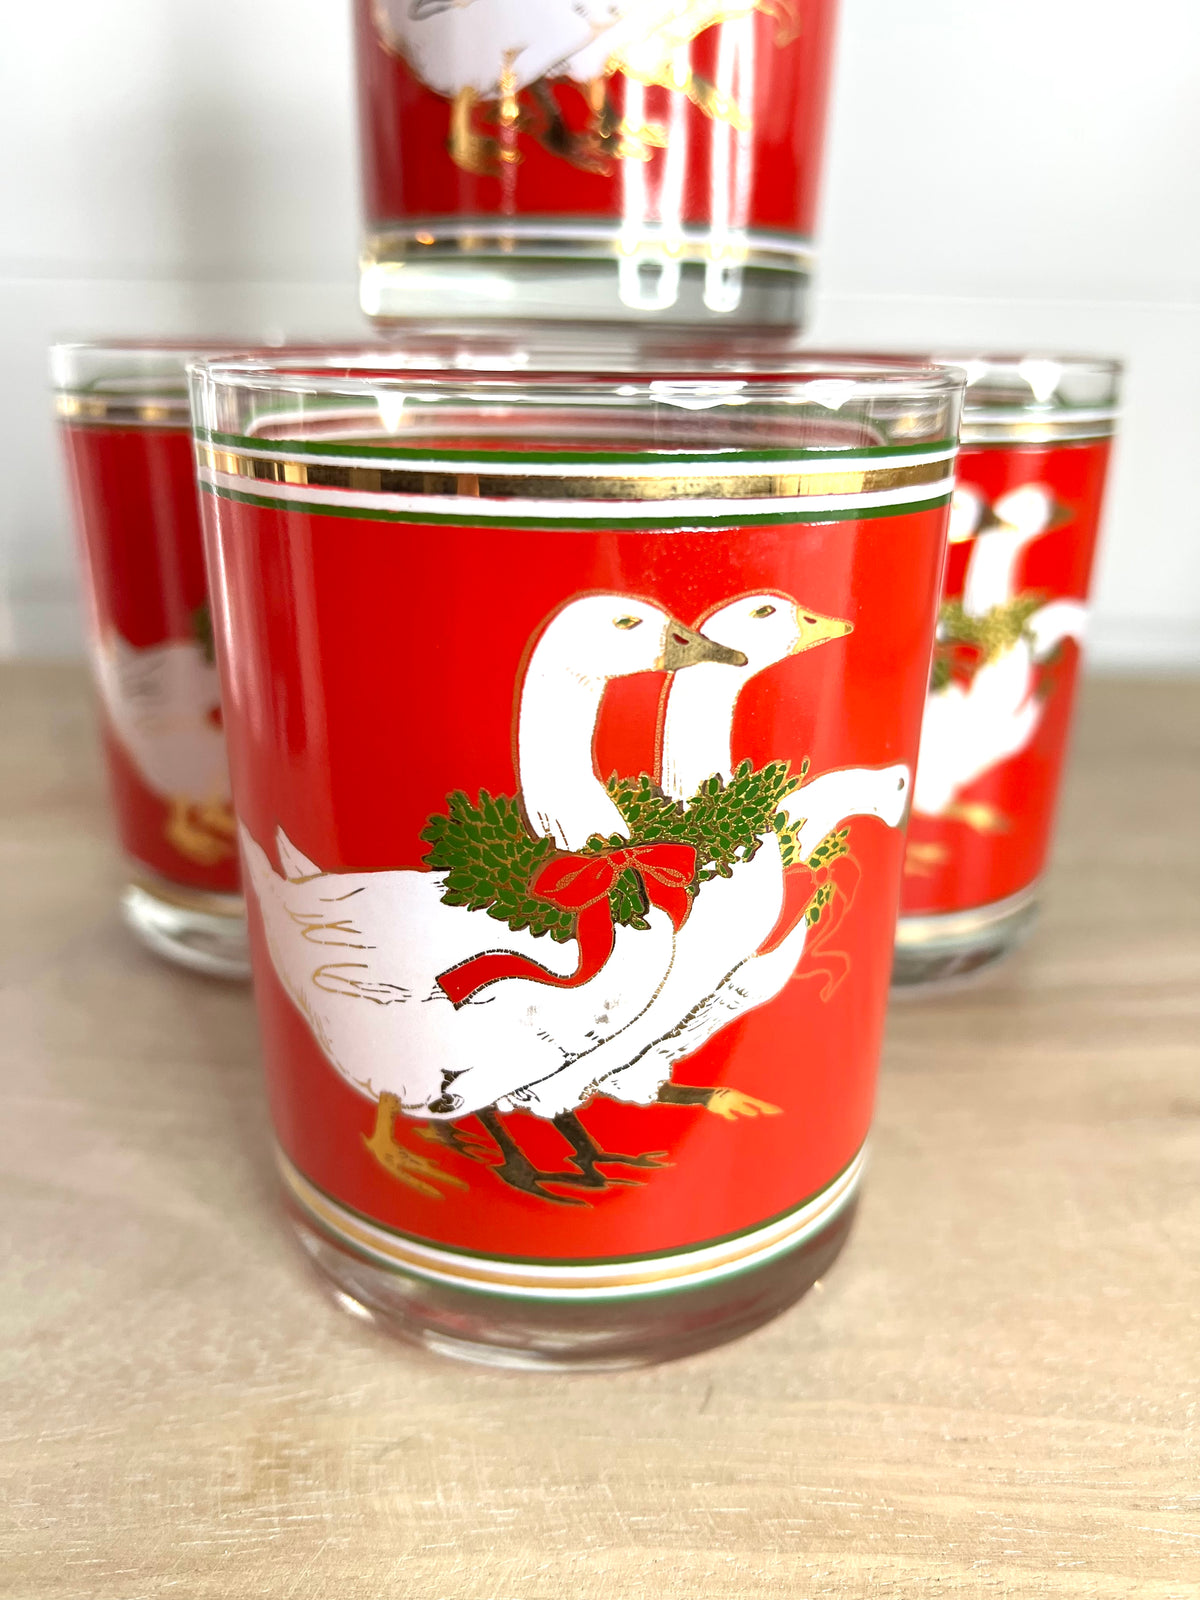 Red Flying Geese, Cattail Tom Collins Glasses, Mid-century Whiskey Glasses  3 Glasses Red Geese/red Bird Christmas Glasses 